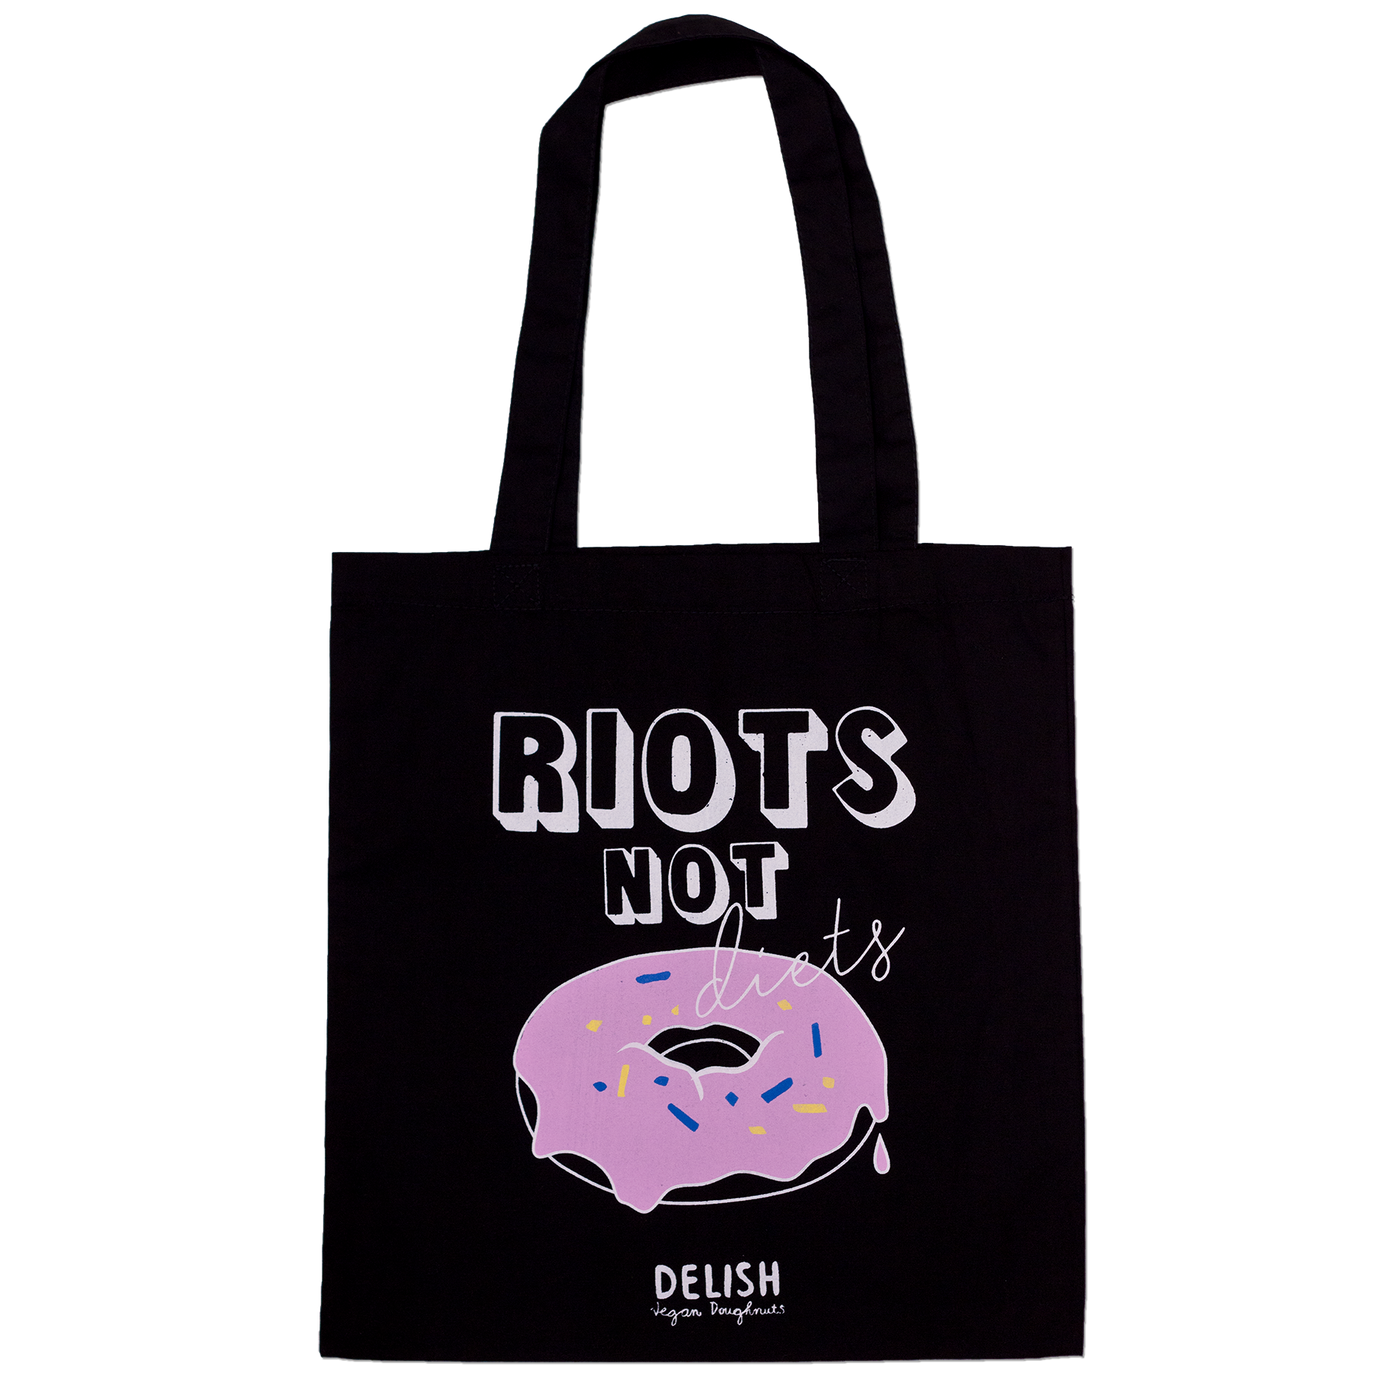 Totebag "Riots not diets"